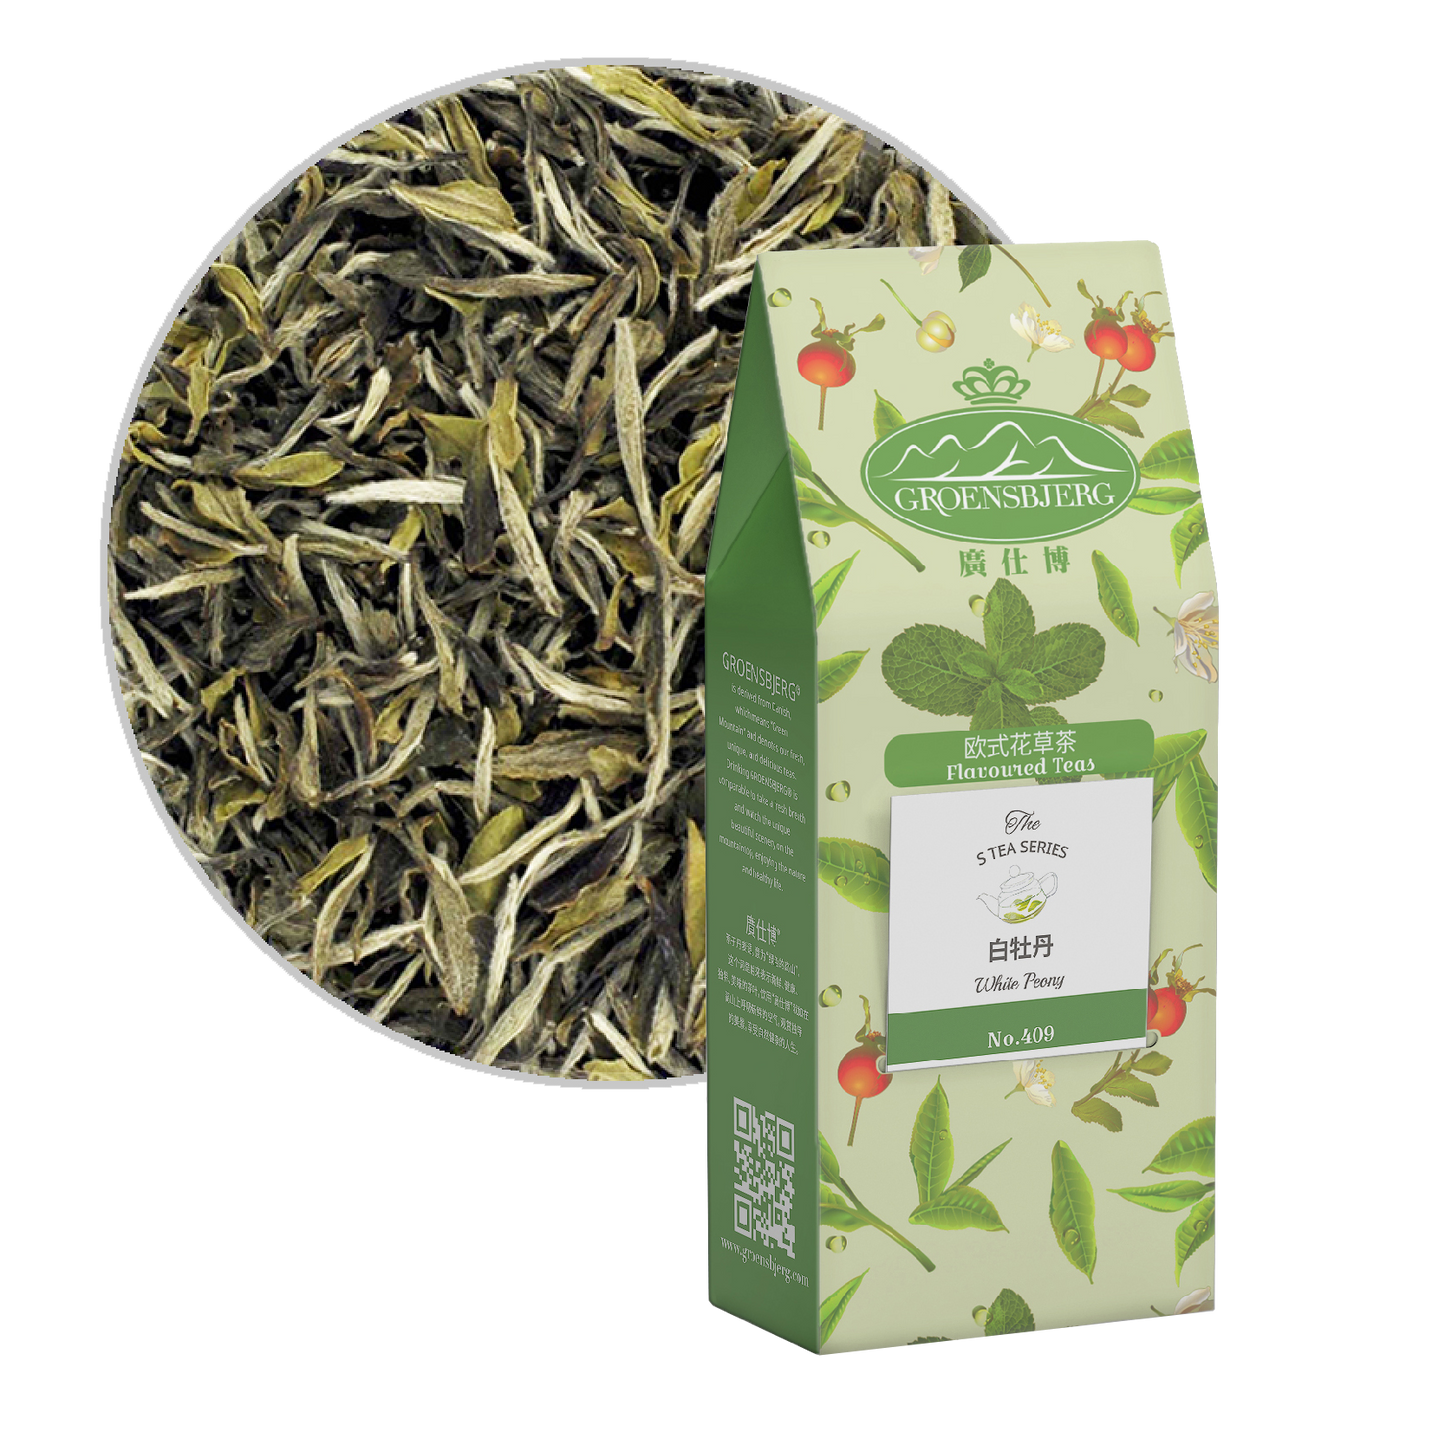 White Peony 38g Pouch Box with Loose Tea